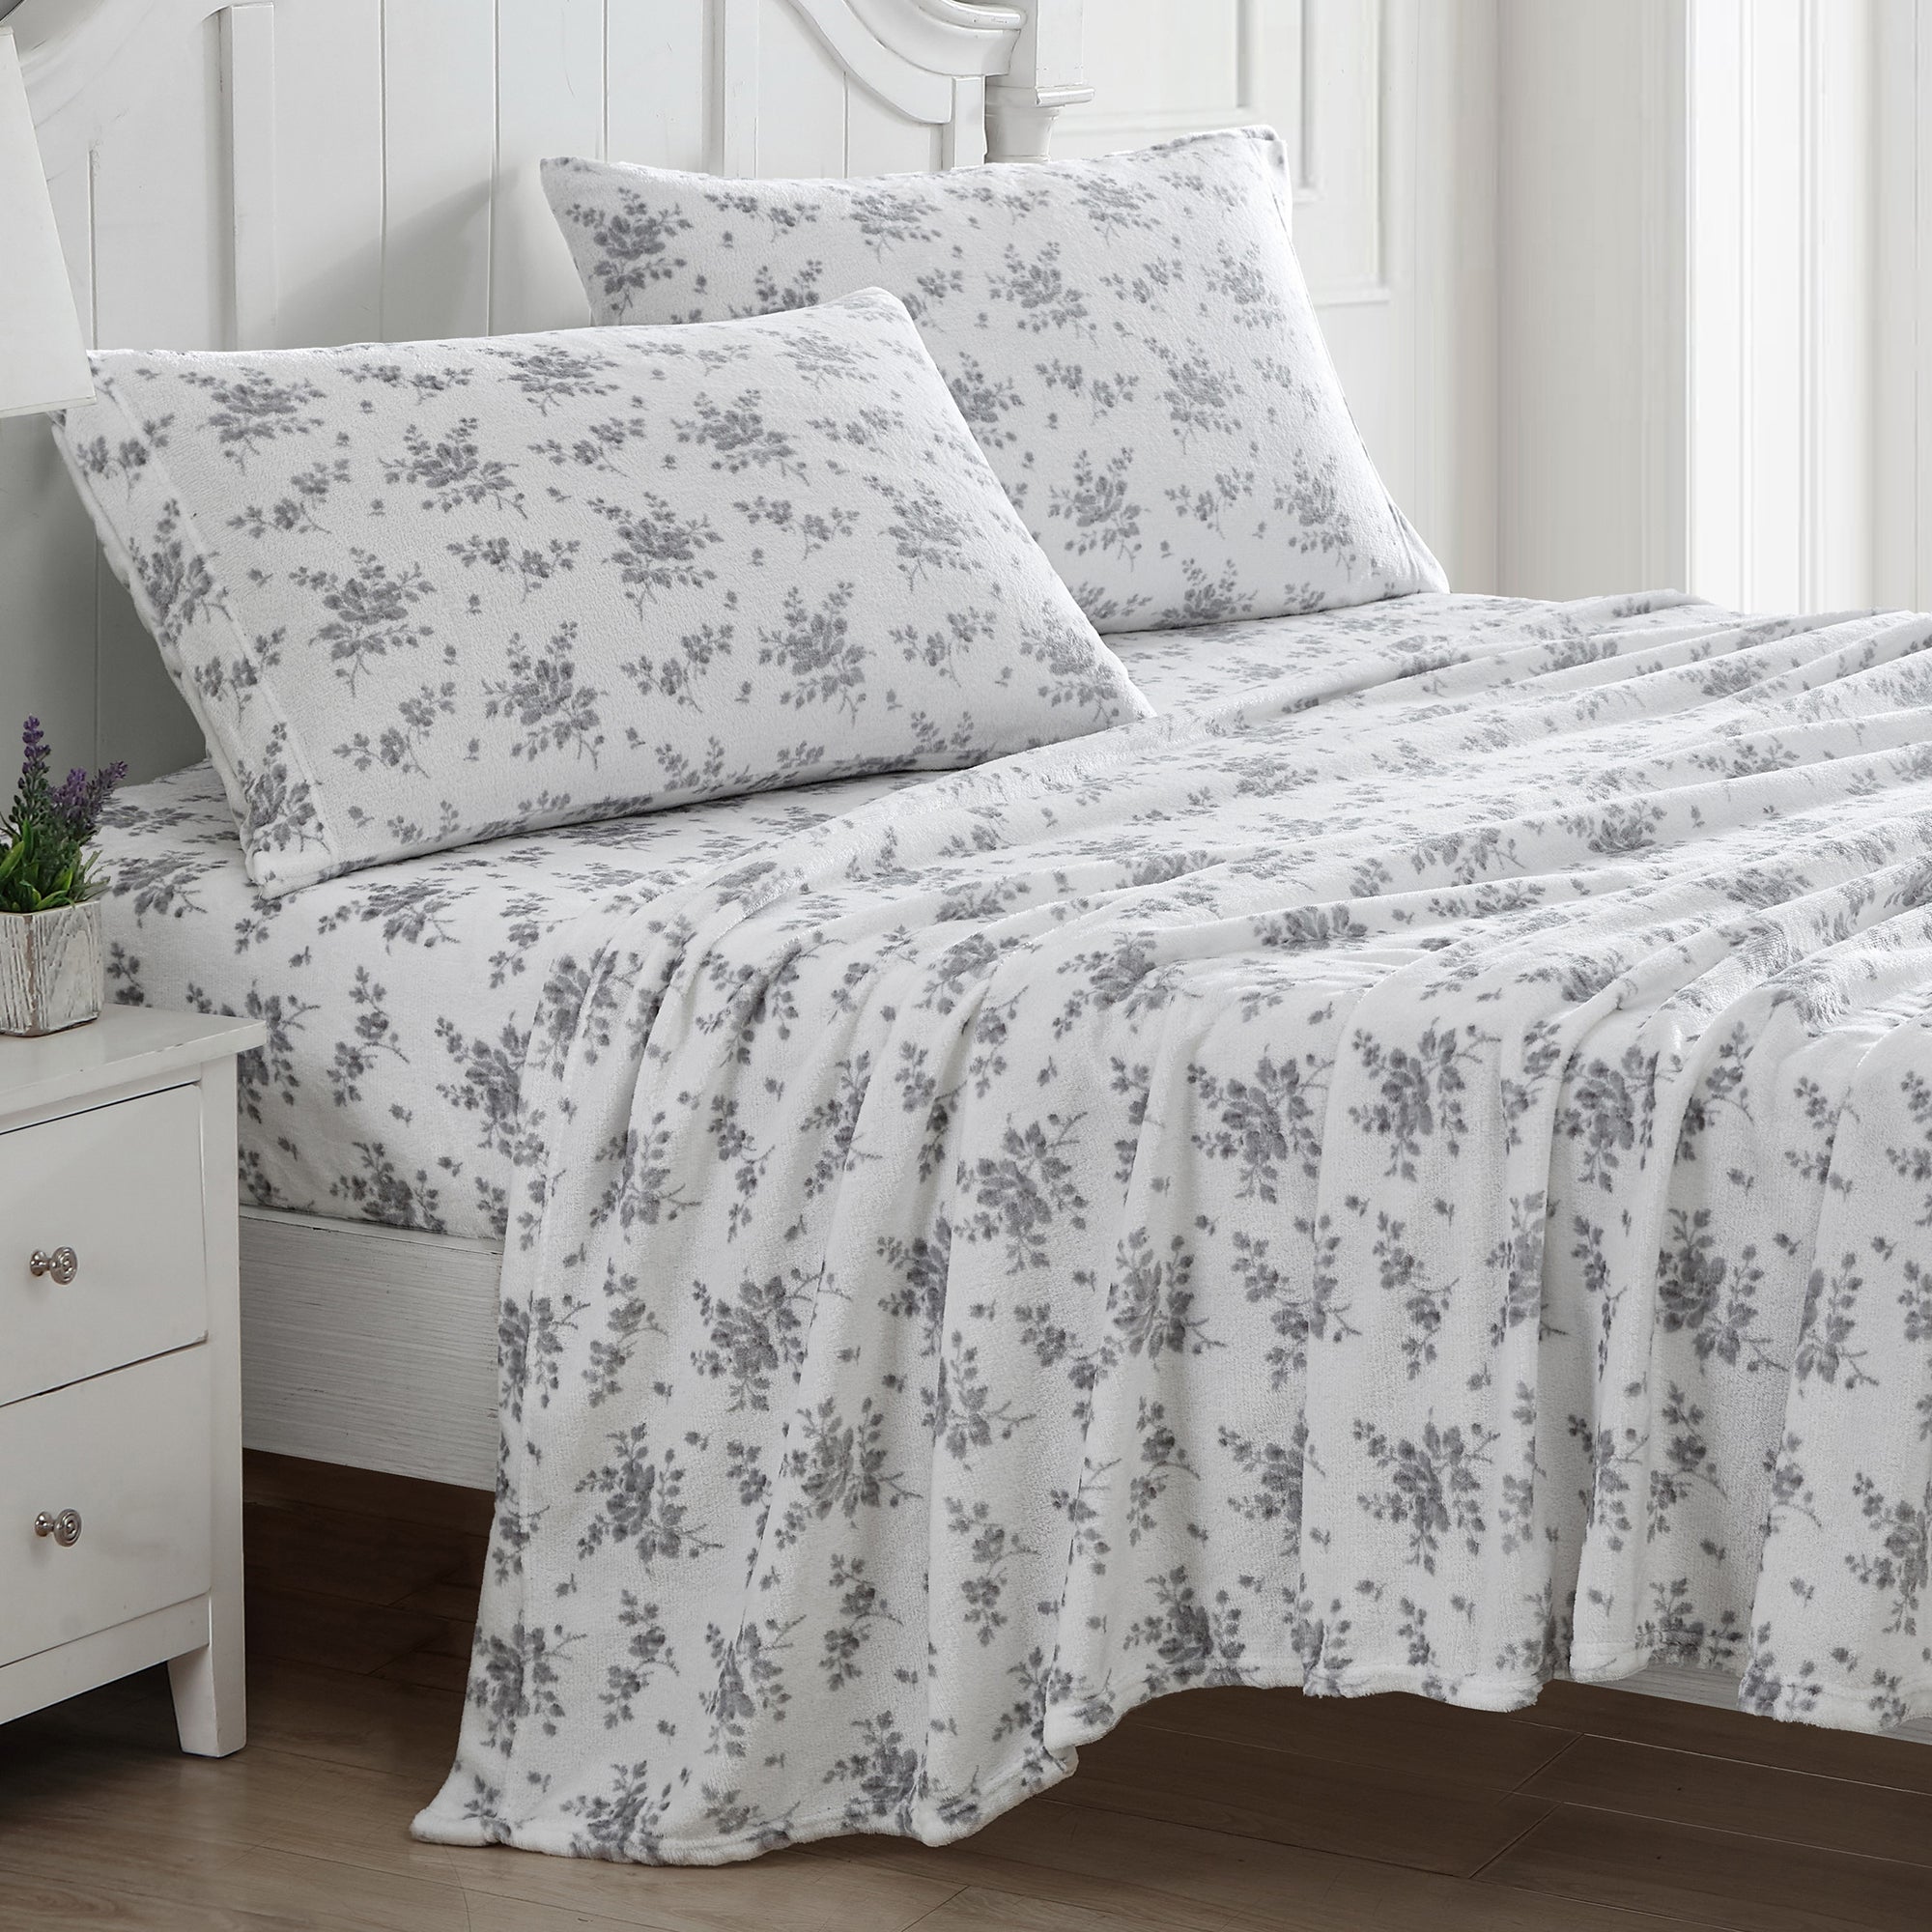 Cherish the timeless florals and warm embrace of the Laura Ashley Rachel Flannel Fleece Sheet Set Silver.